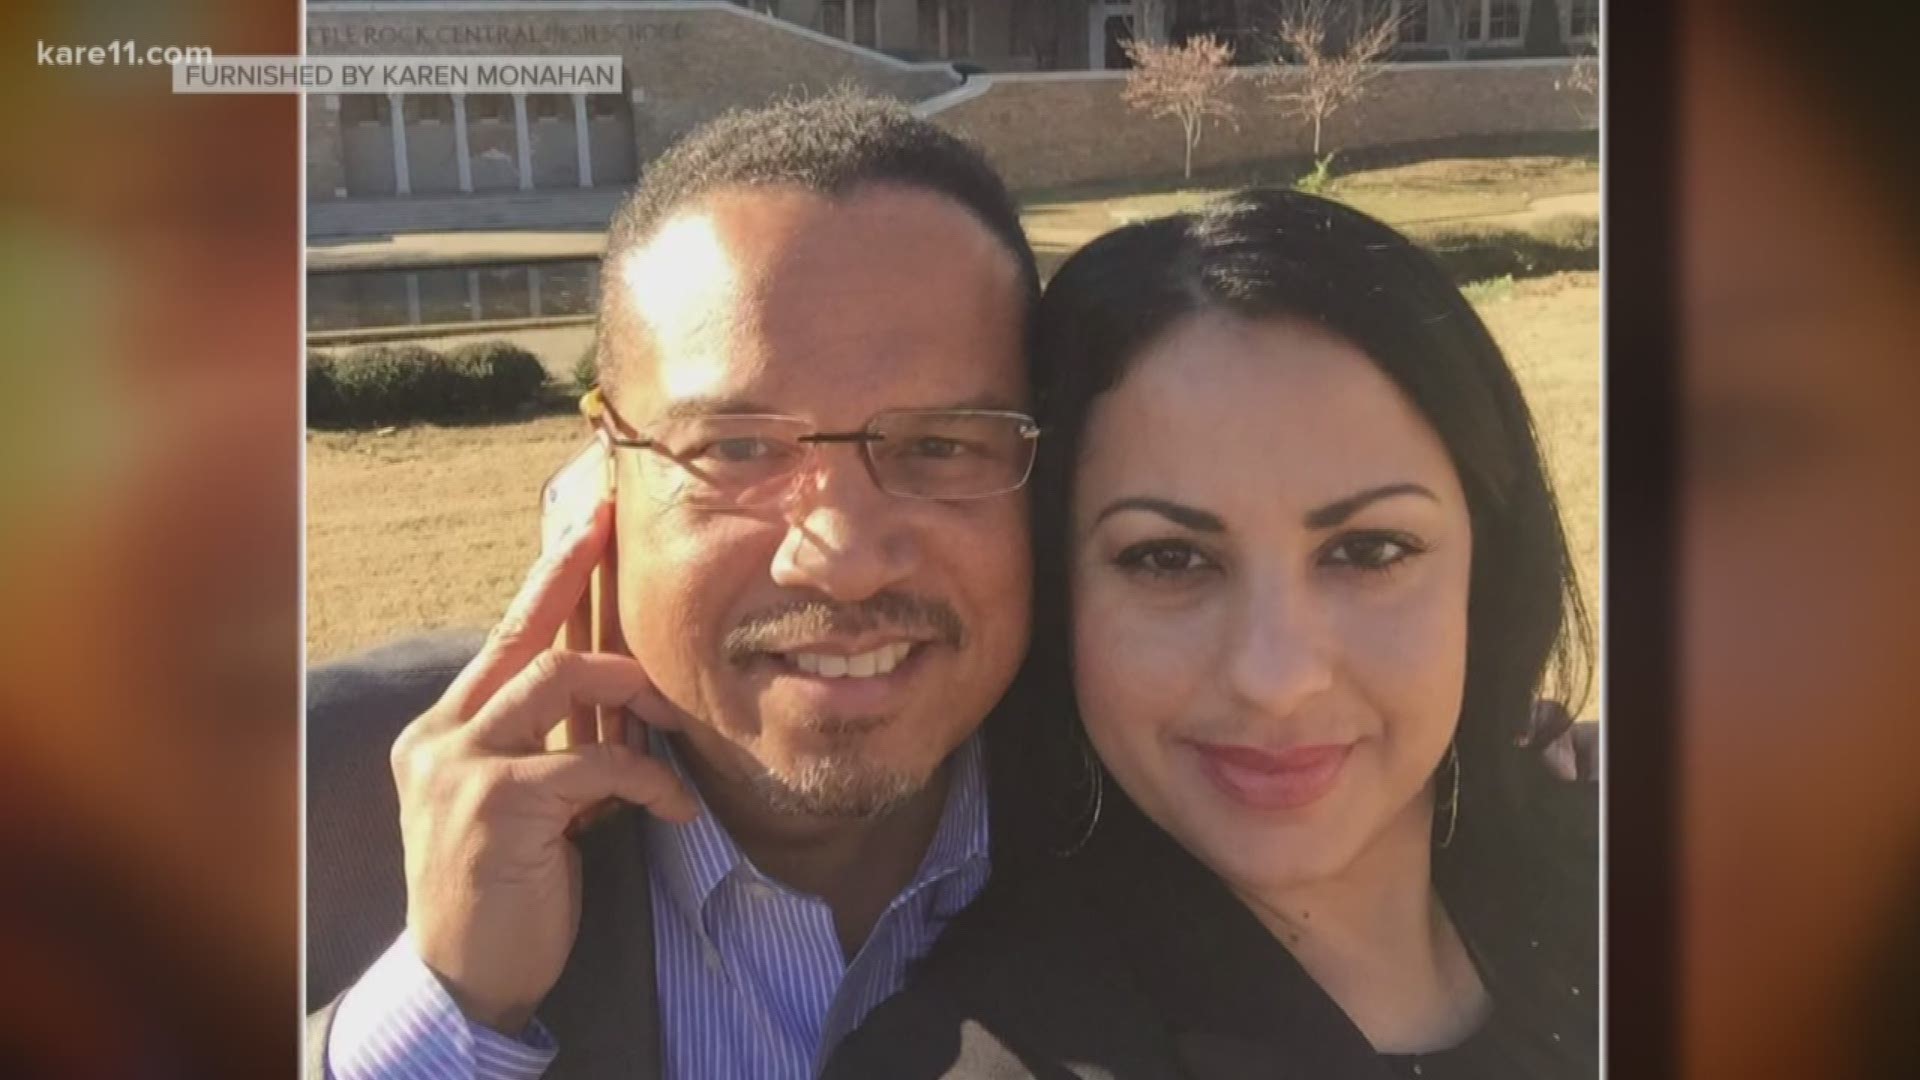 the domestic abuse allegations against Congressman Keith Ellison and how that could impact tomorrow's primary election.